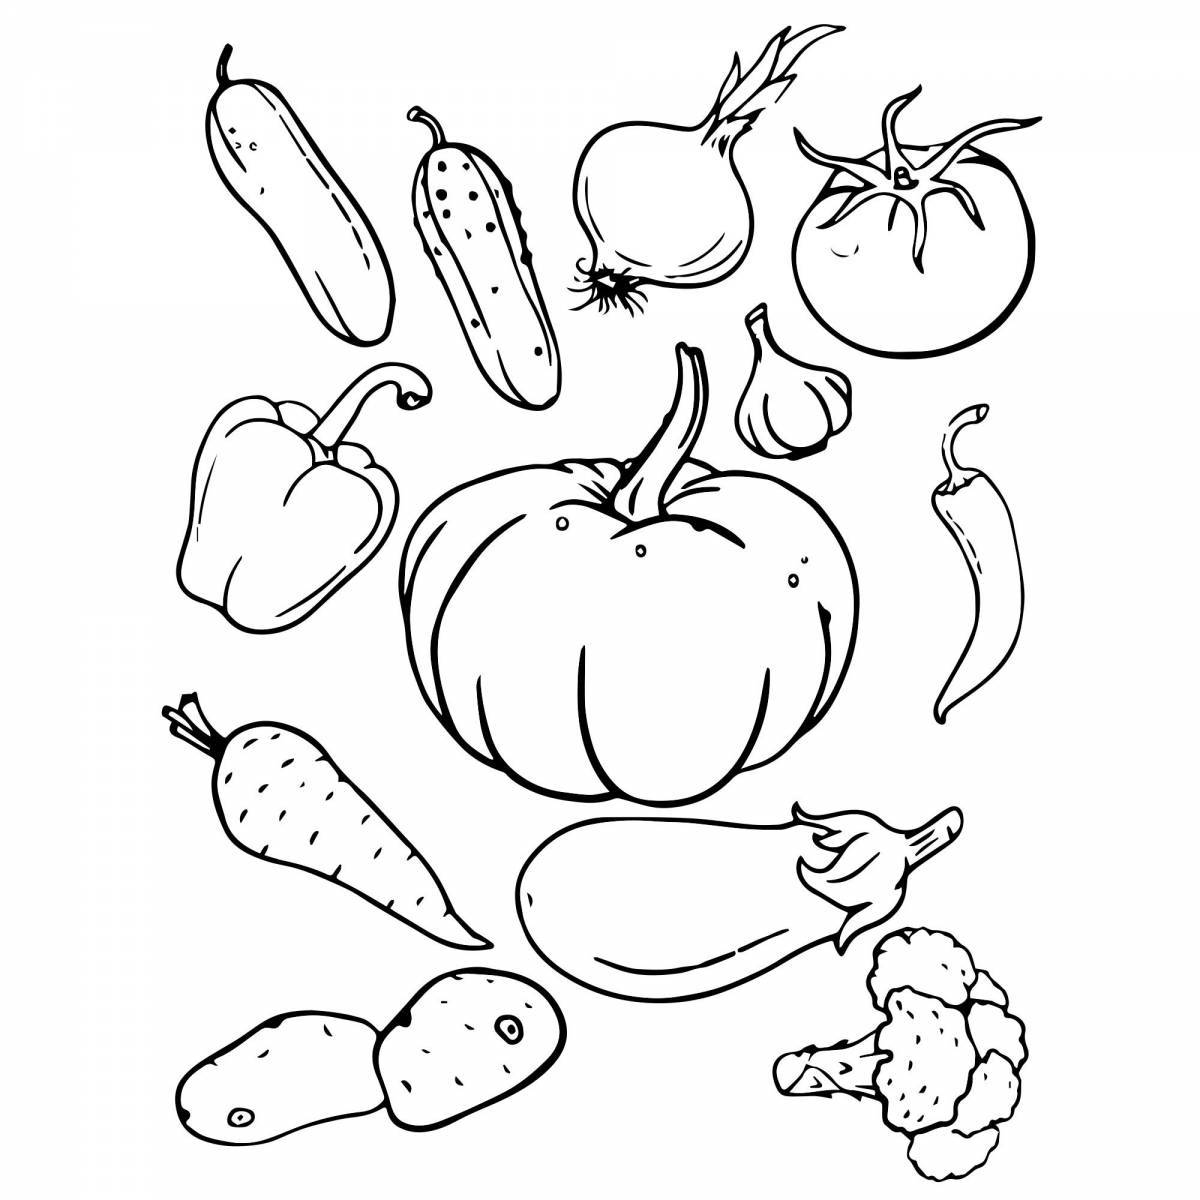 Amazing fruit coloring page